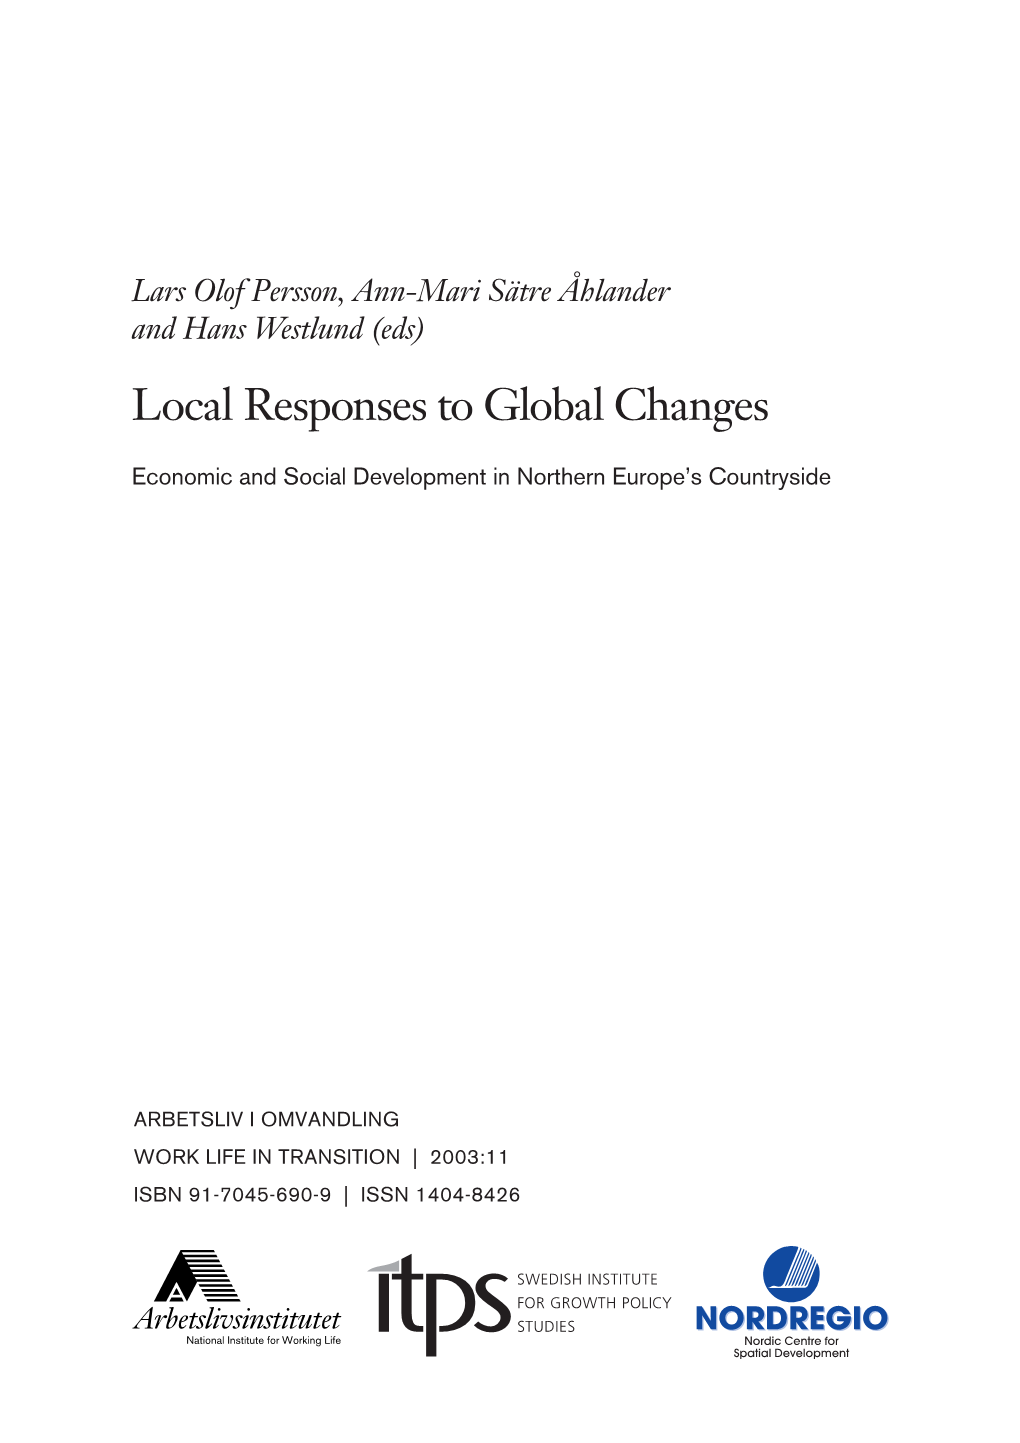 Local Responses to Global Changes. Economic and Social Development